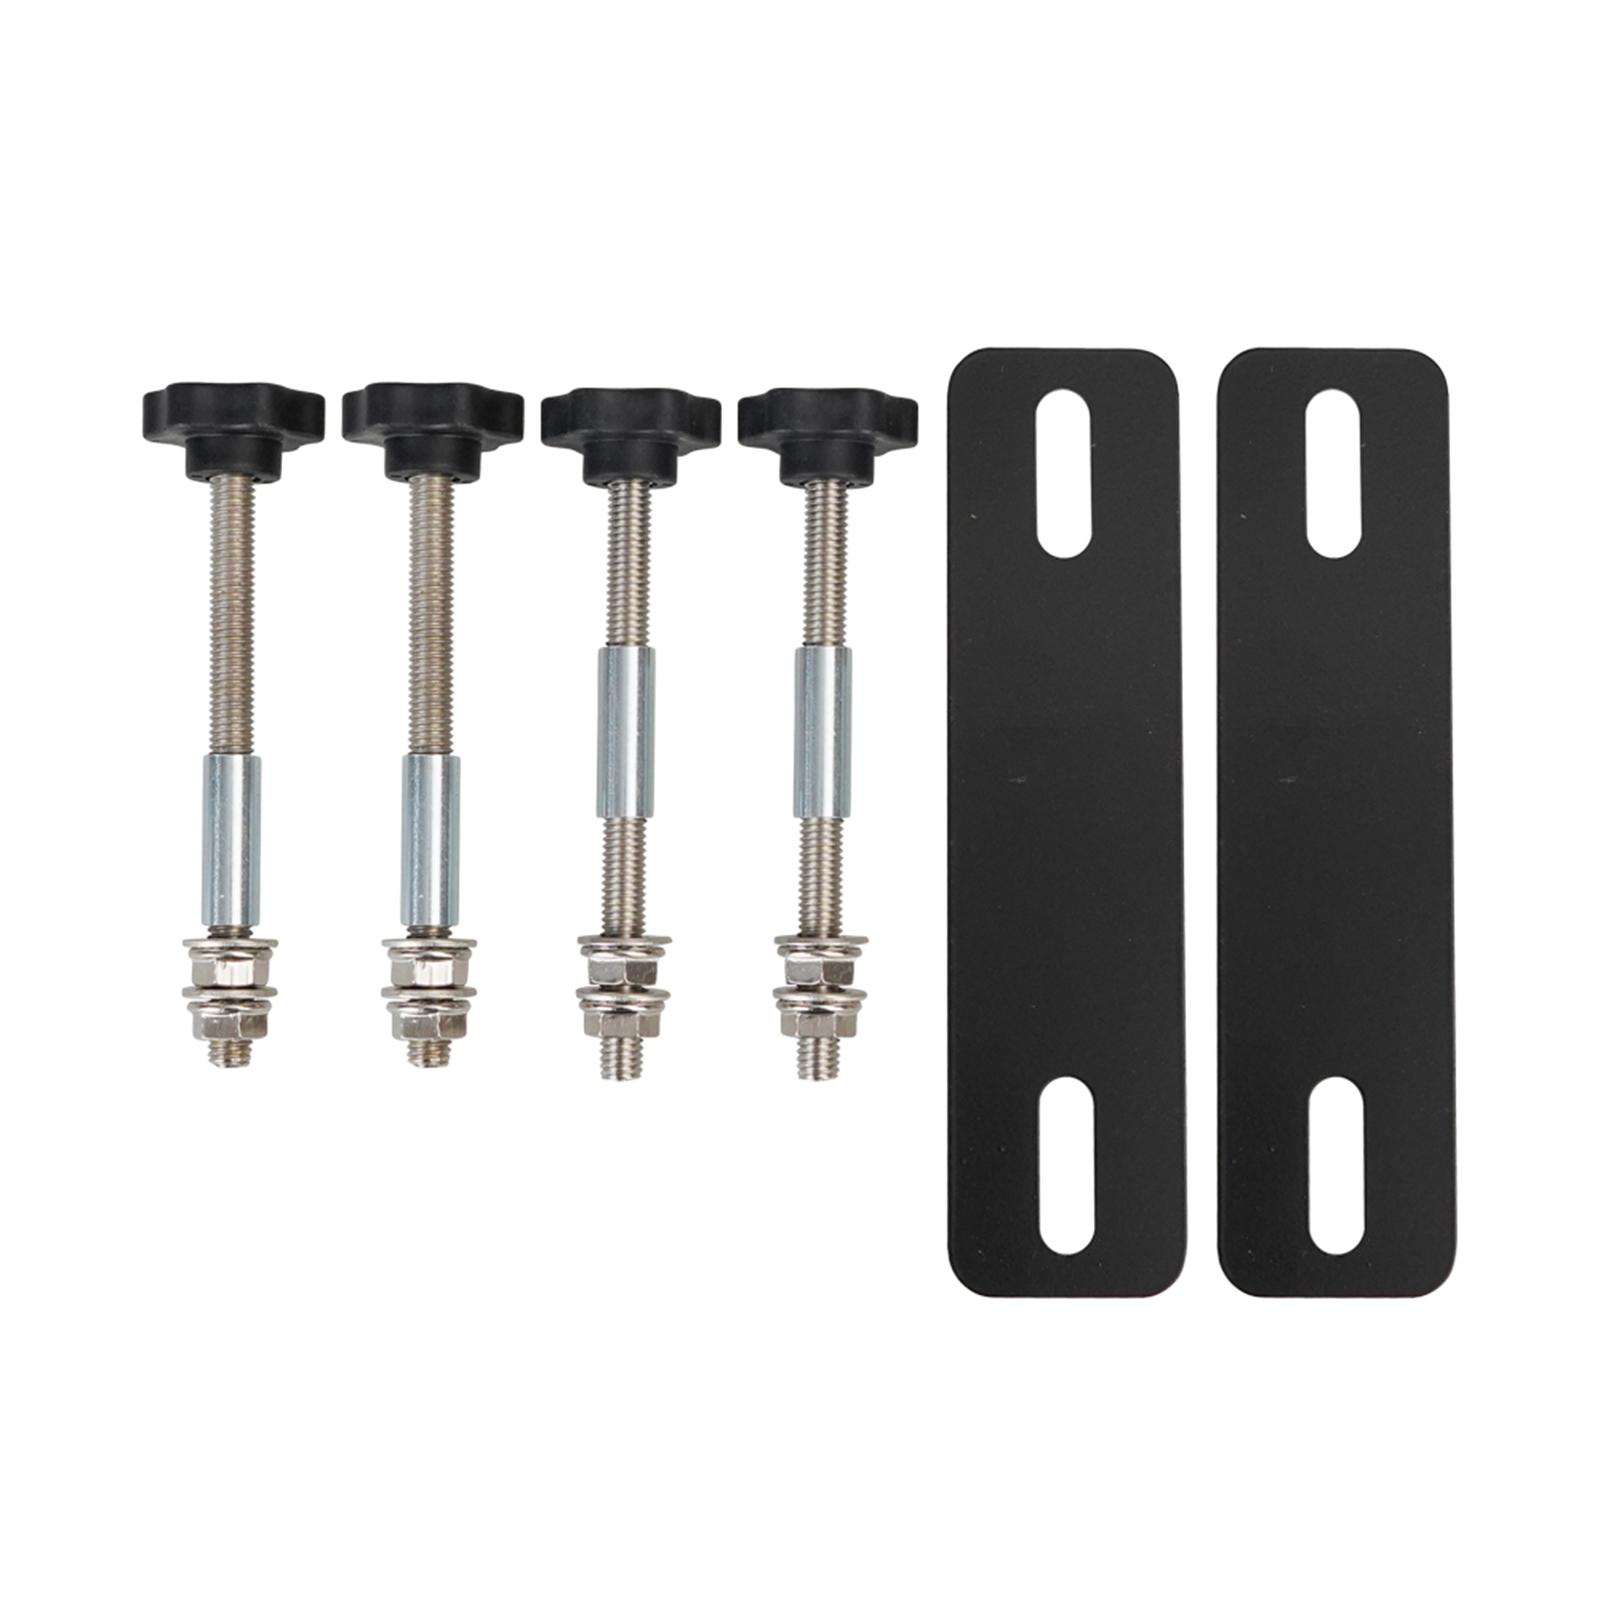 Mounting Pins Kits Hardware Easy to Install Professional for Traction Boards